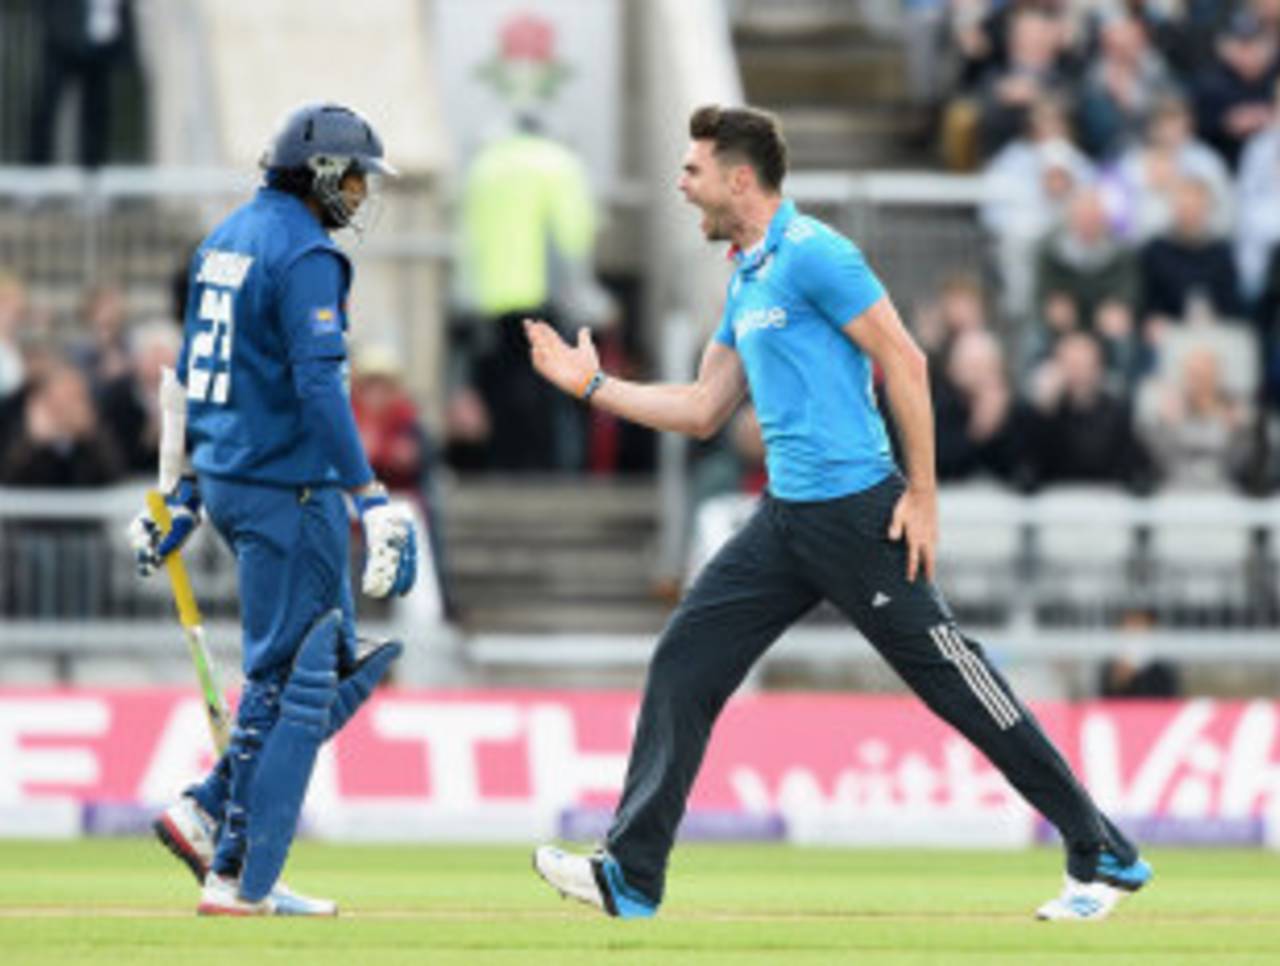 A wide gave James Anderson an extra delivery to remove Tillakaratne Dilshan&nbsp;&nbsp;&bull;&nbsp;&nbsp;Getty Images